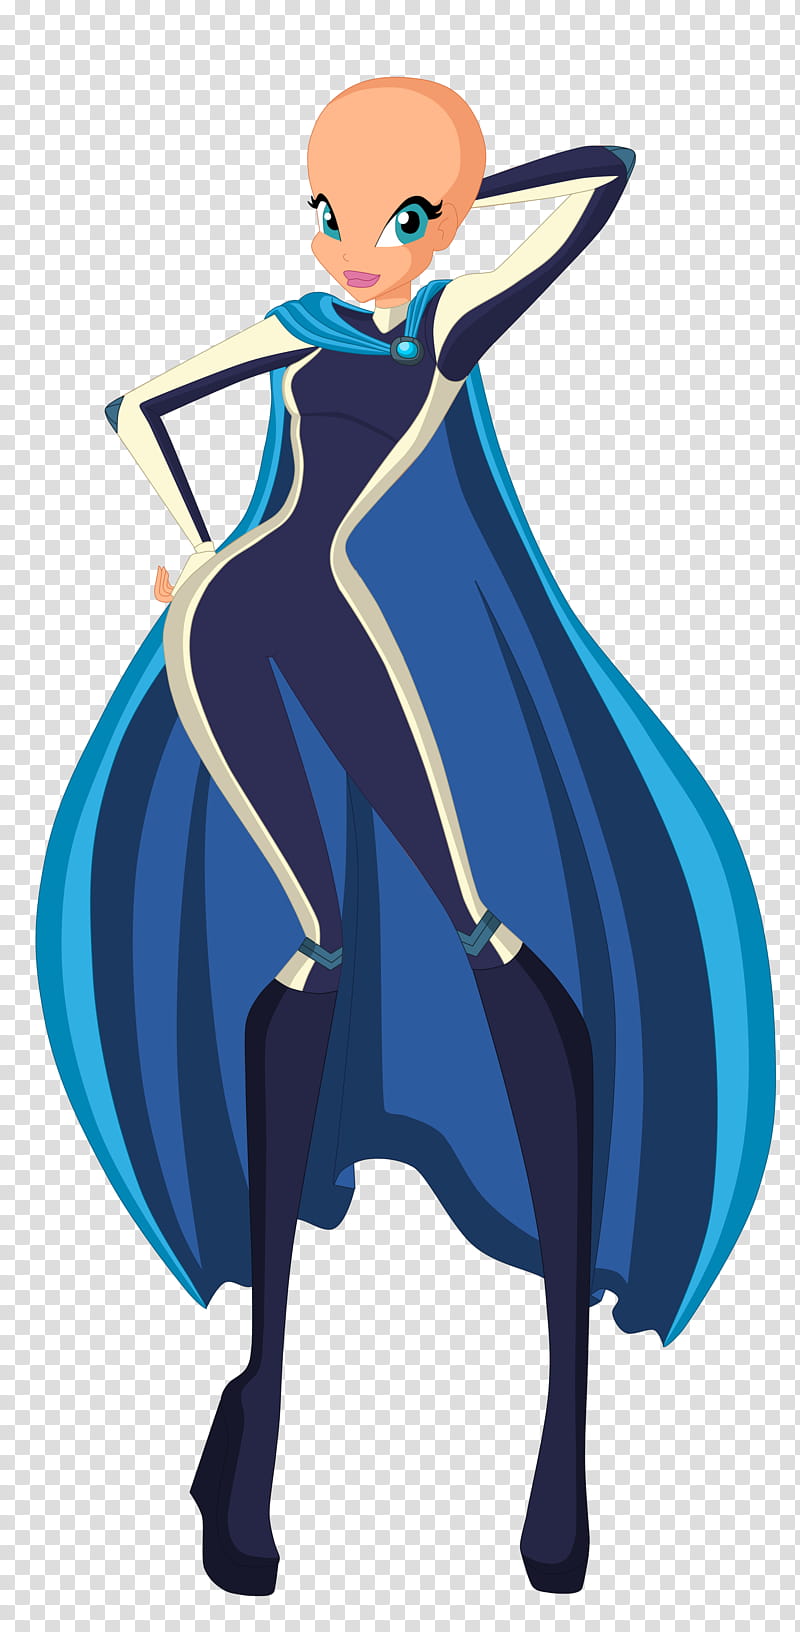 Winx club base Female specialist , female cartoon character illustration transparent background PNG clipart